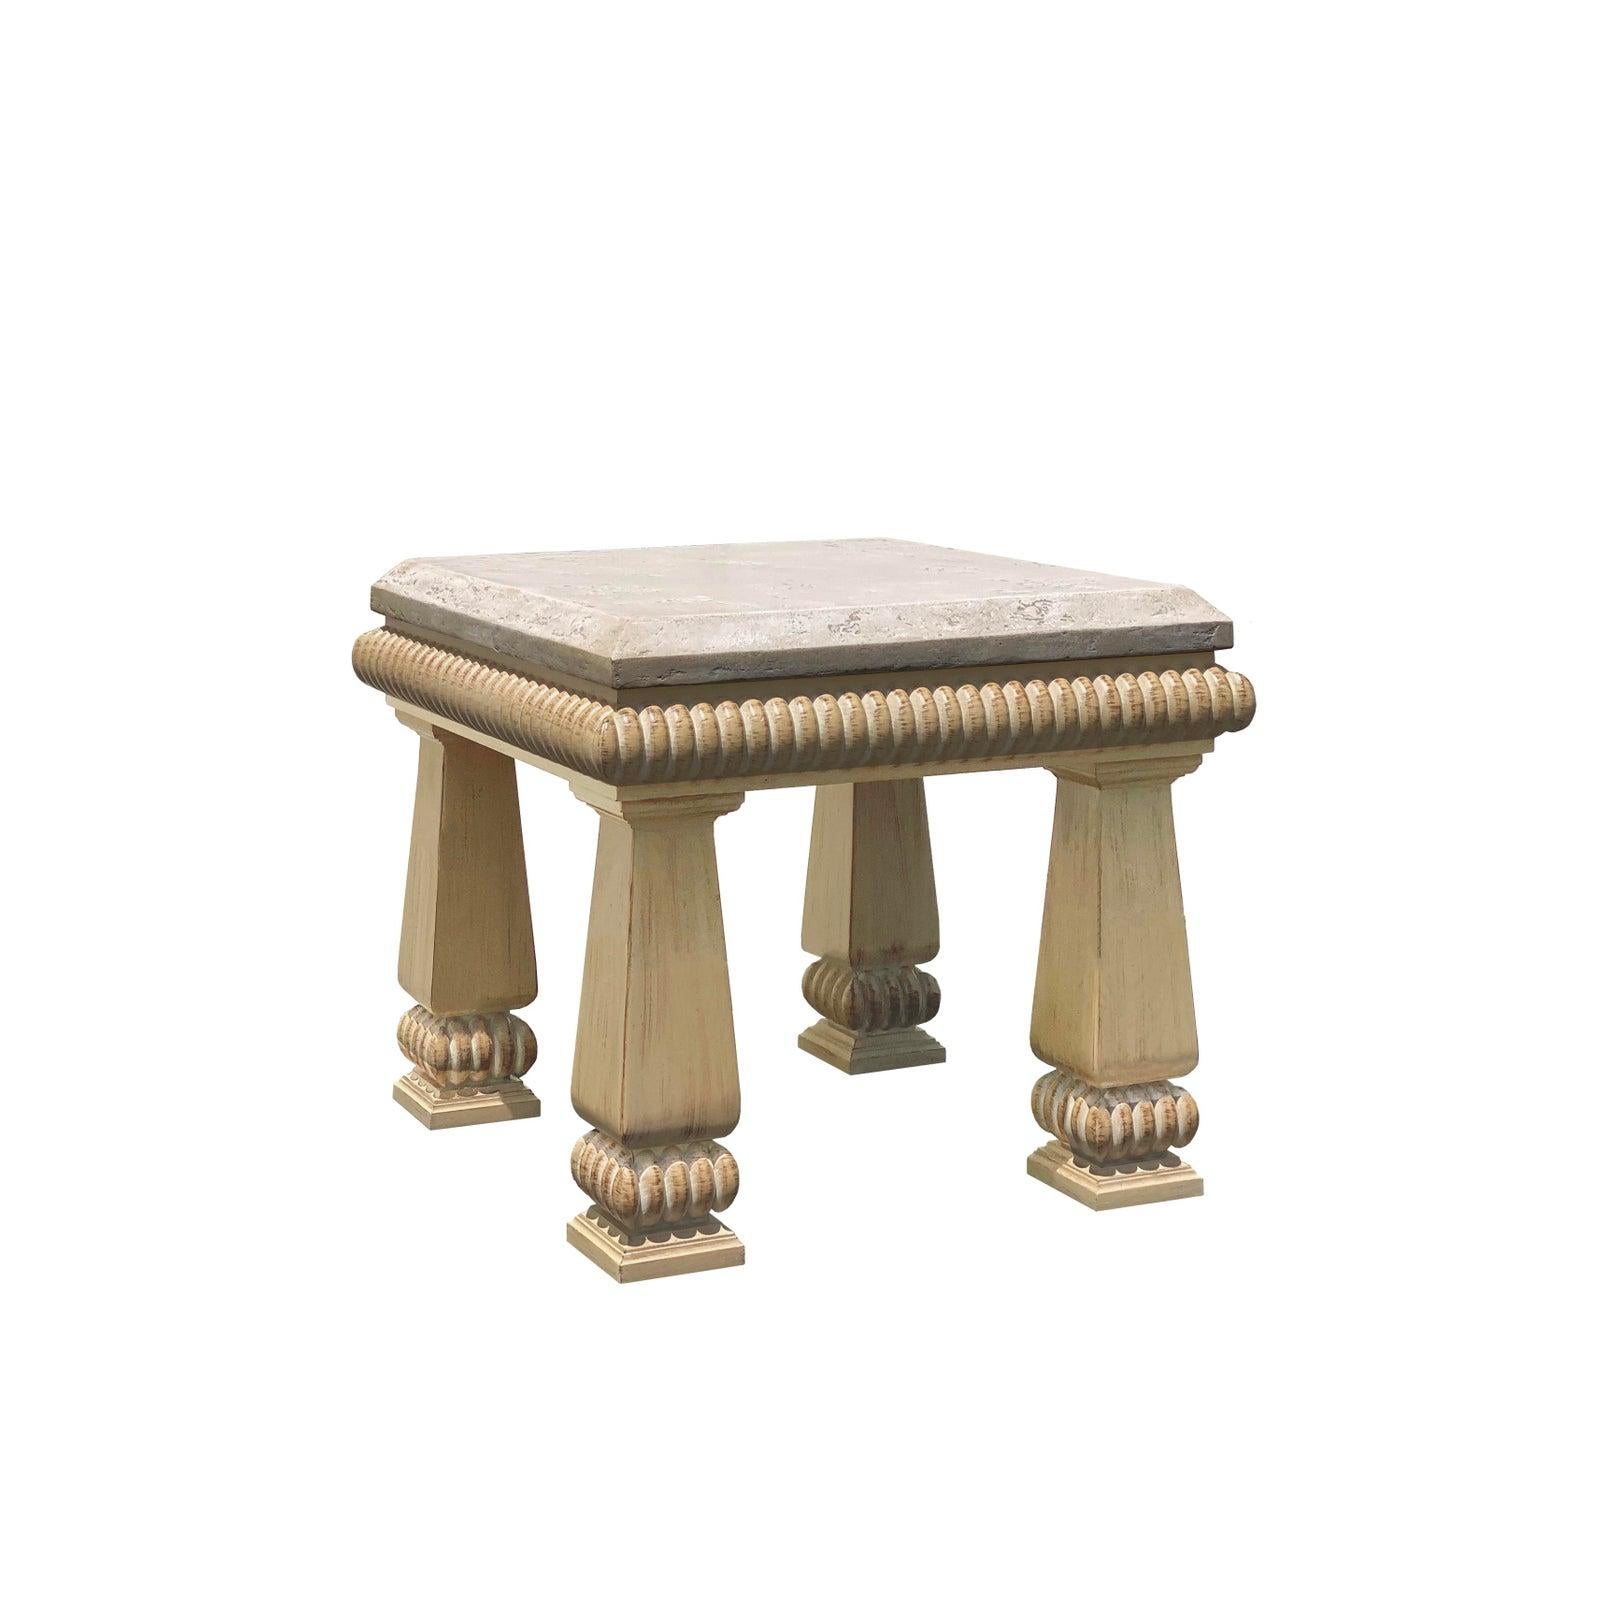 A beautiful near-perfect condition Kreiss stone-top, carved wood accent table. The table has wonderful, large scale. Stone top looks like a smoothed travertine blend. A matching coffee table is within my listings as well. The wood has a pale